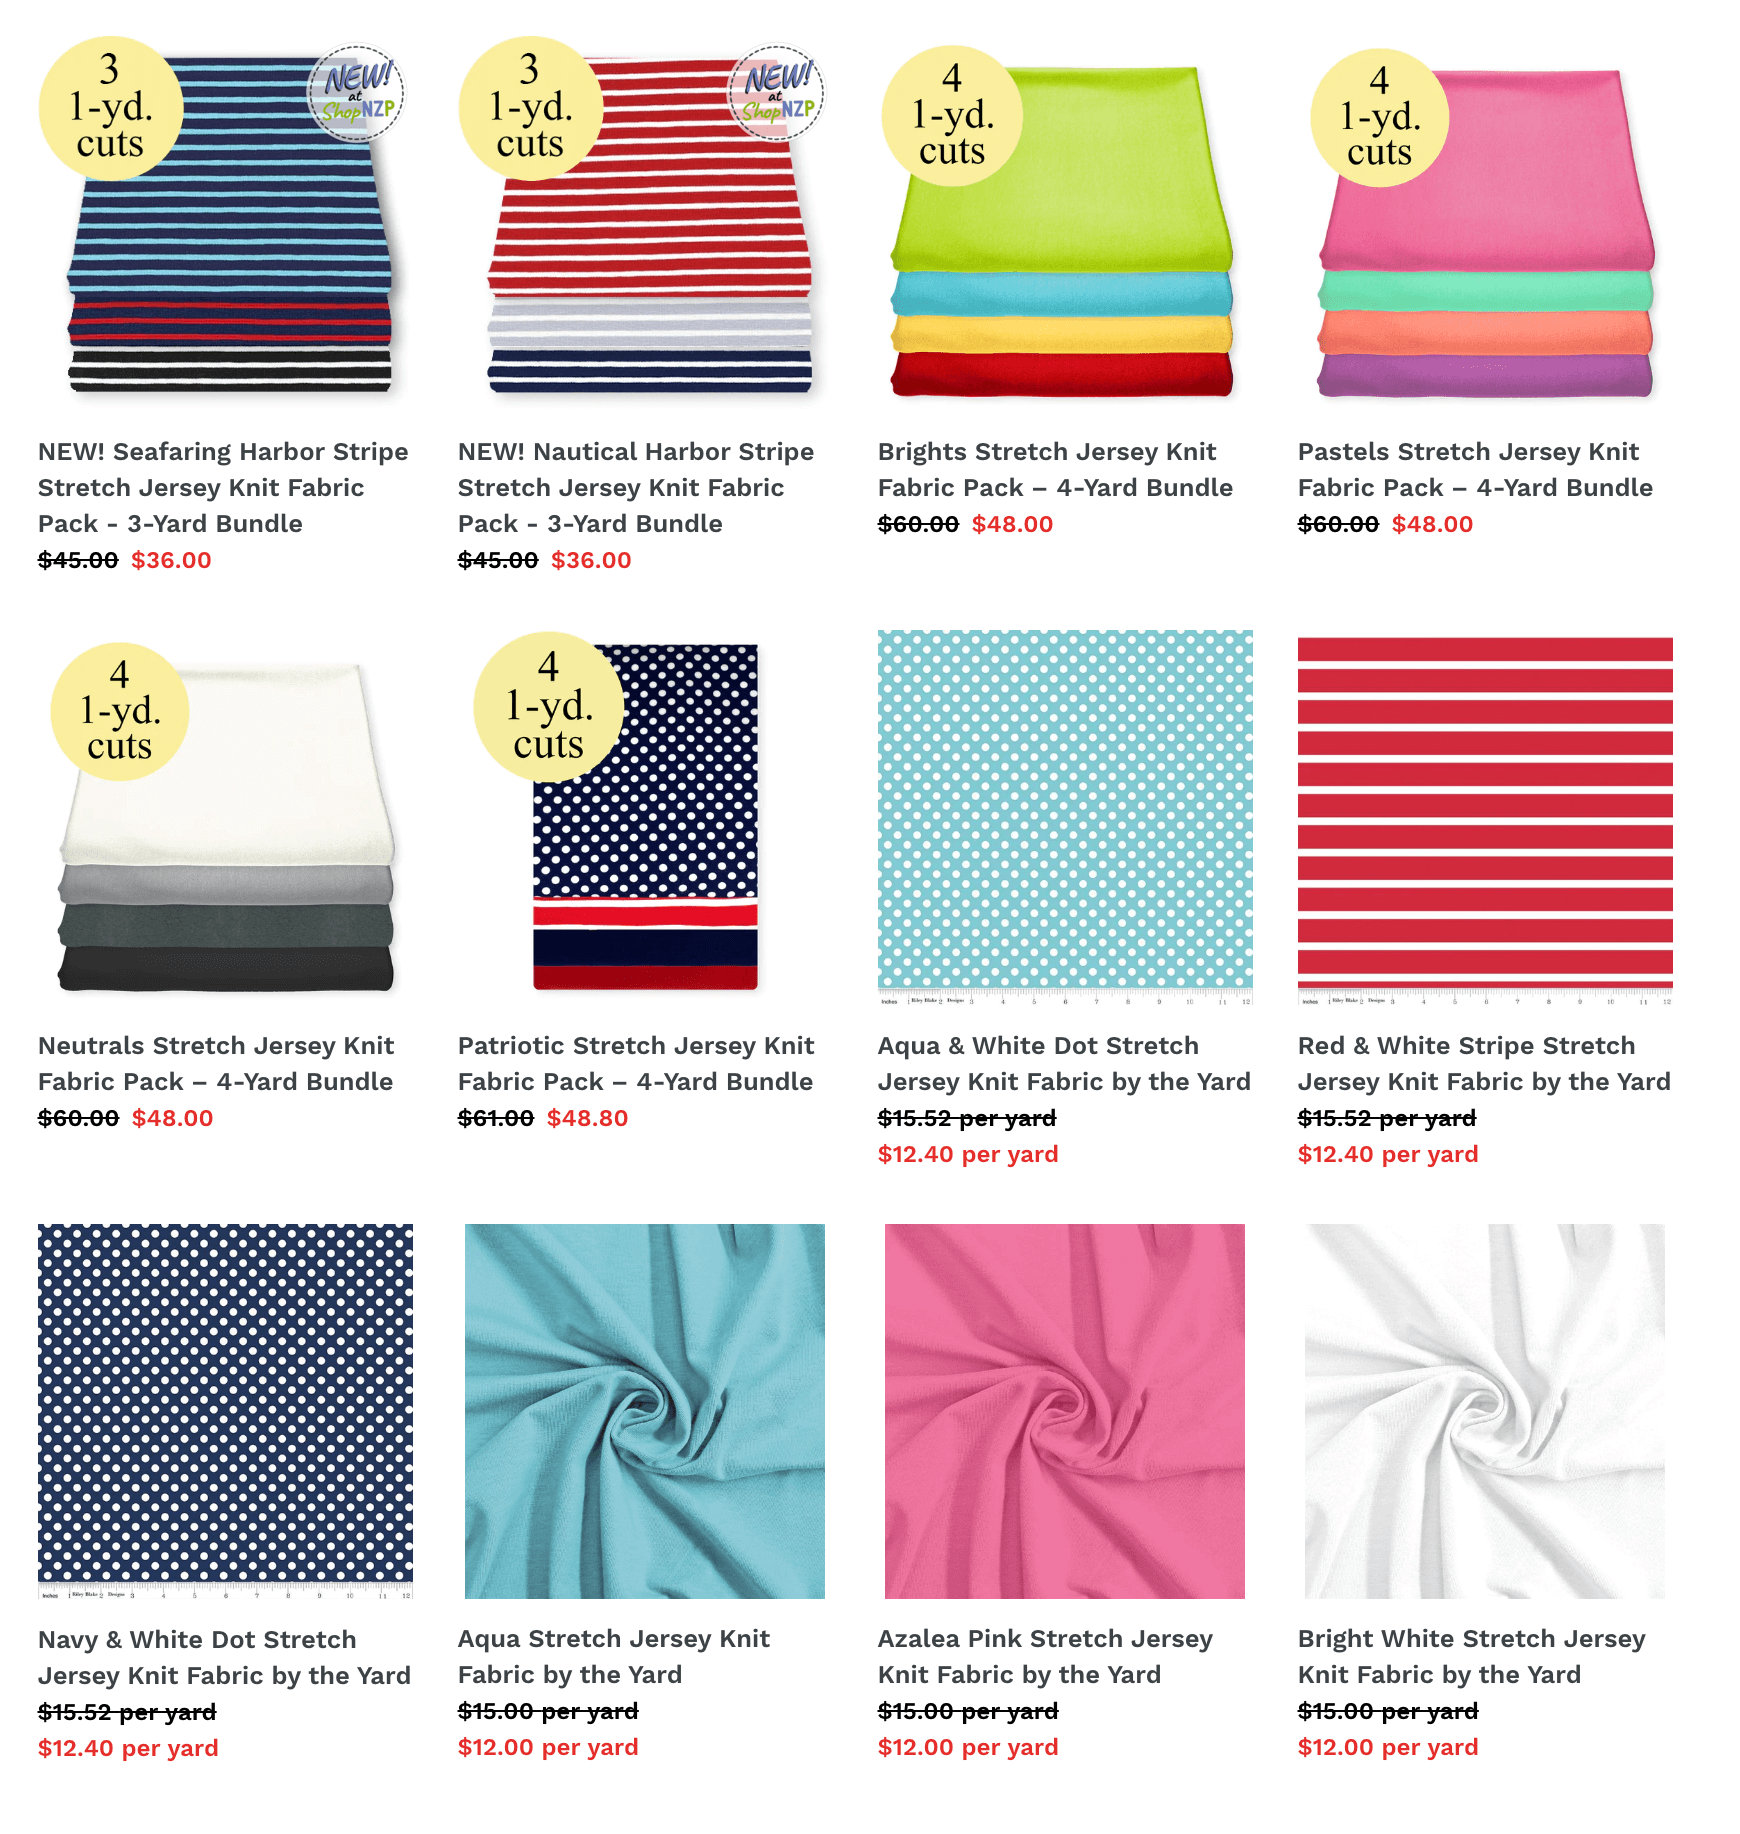 NEW! Harbor Stripe Stretch Jersey Knit Fabric Packs at Nancy Zieman Productions at ShopNZP.com